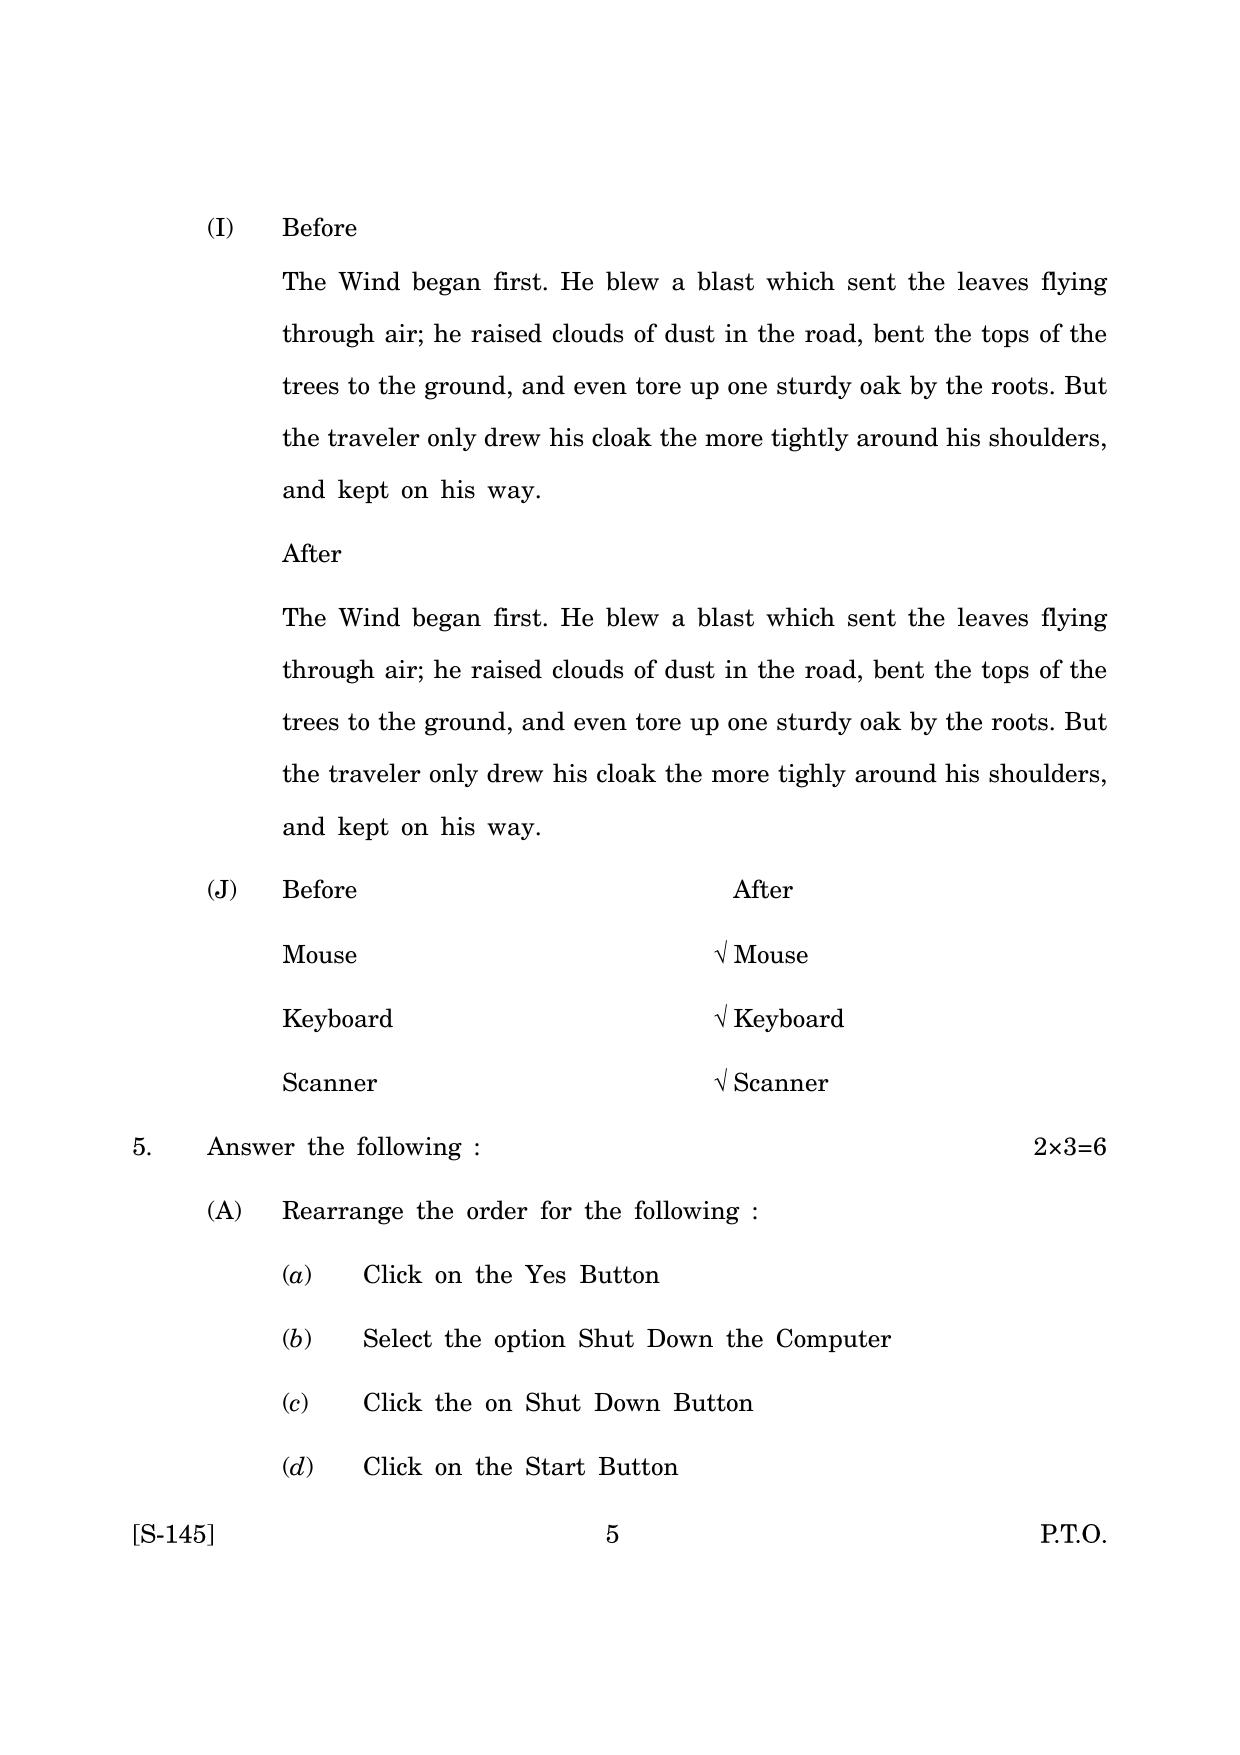 Goa Board Class 10 Word Processing  (June 2019) Question Paper - Page 5